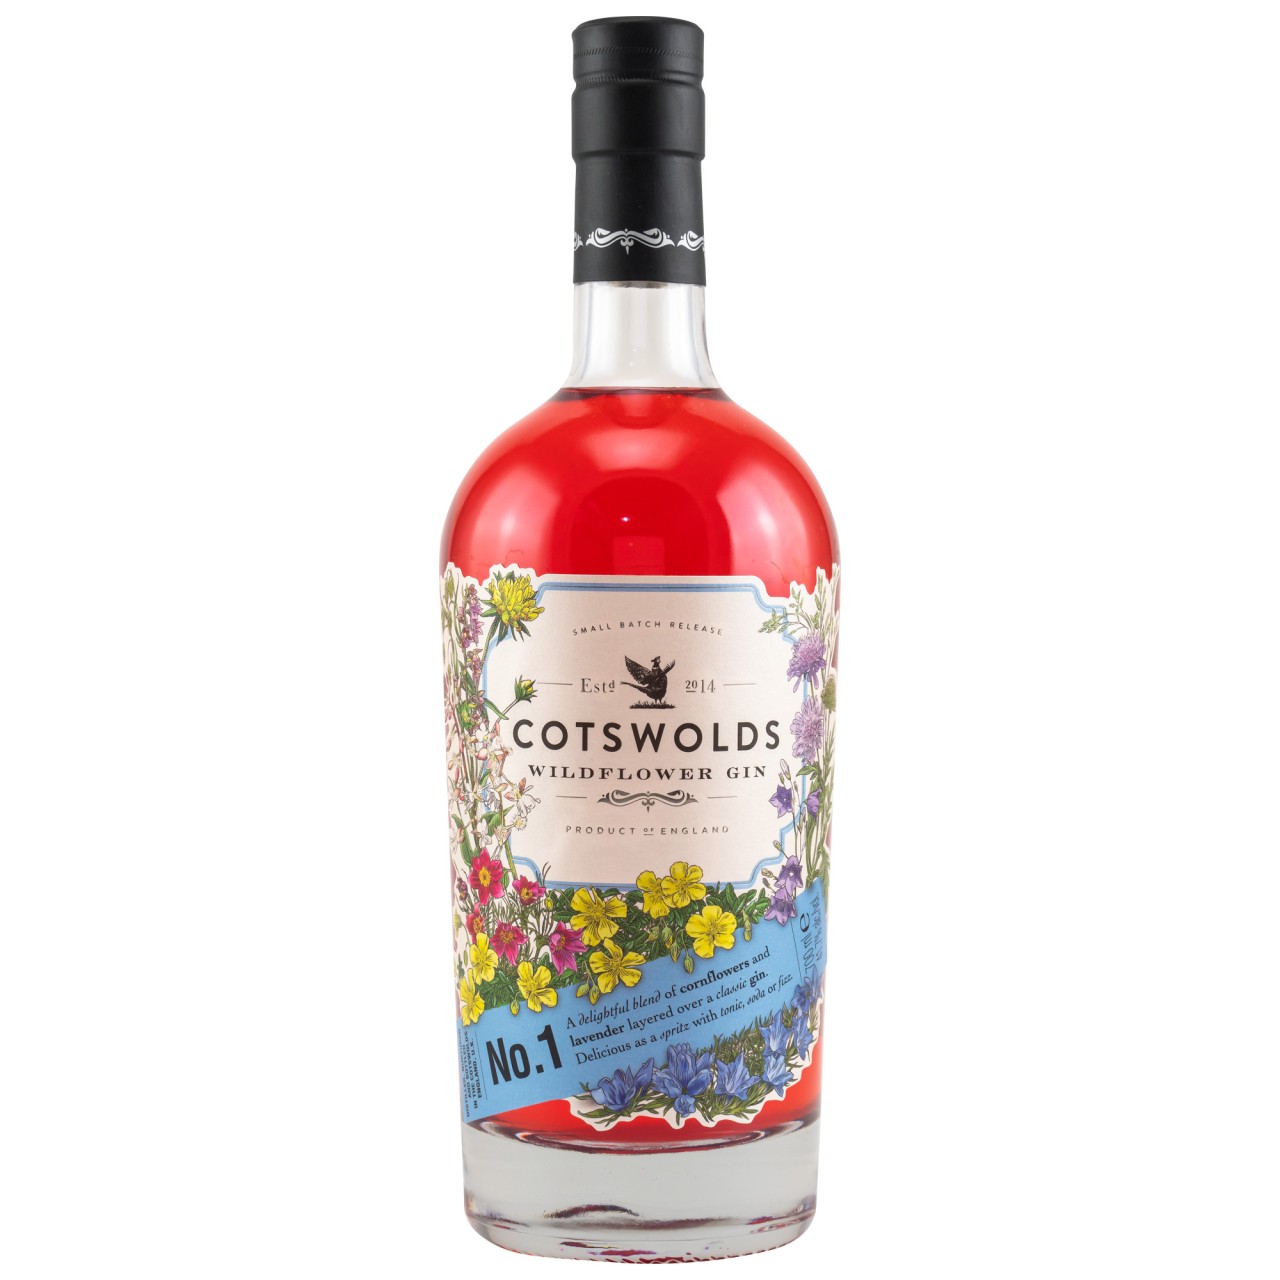 Cotswolds Wildflower Gin No. 1 0,7l